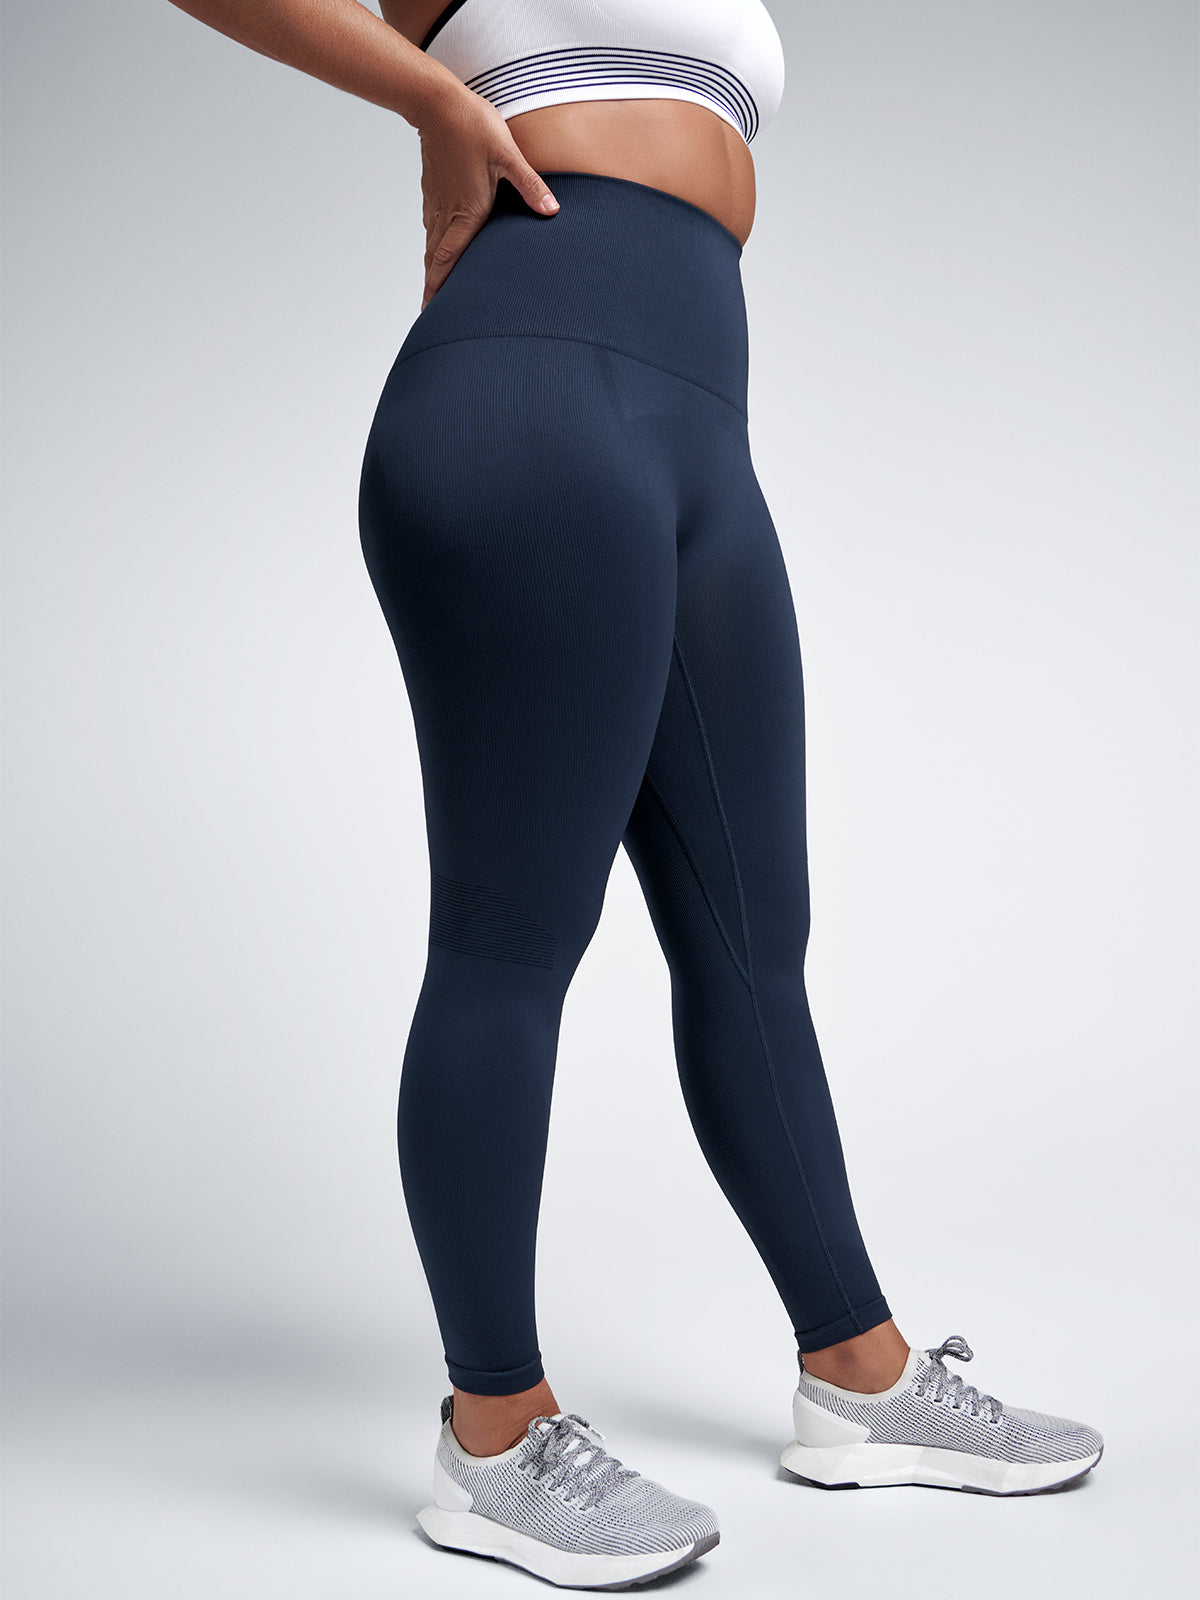 Squat Proof Leggings That Won't Let You Down In the Gym - Ryderwear